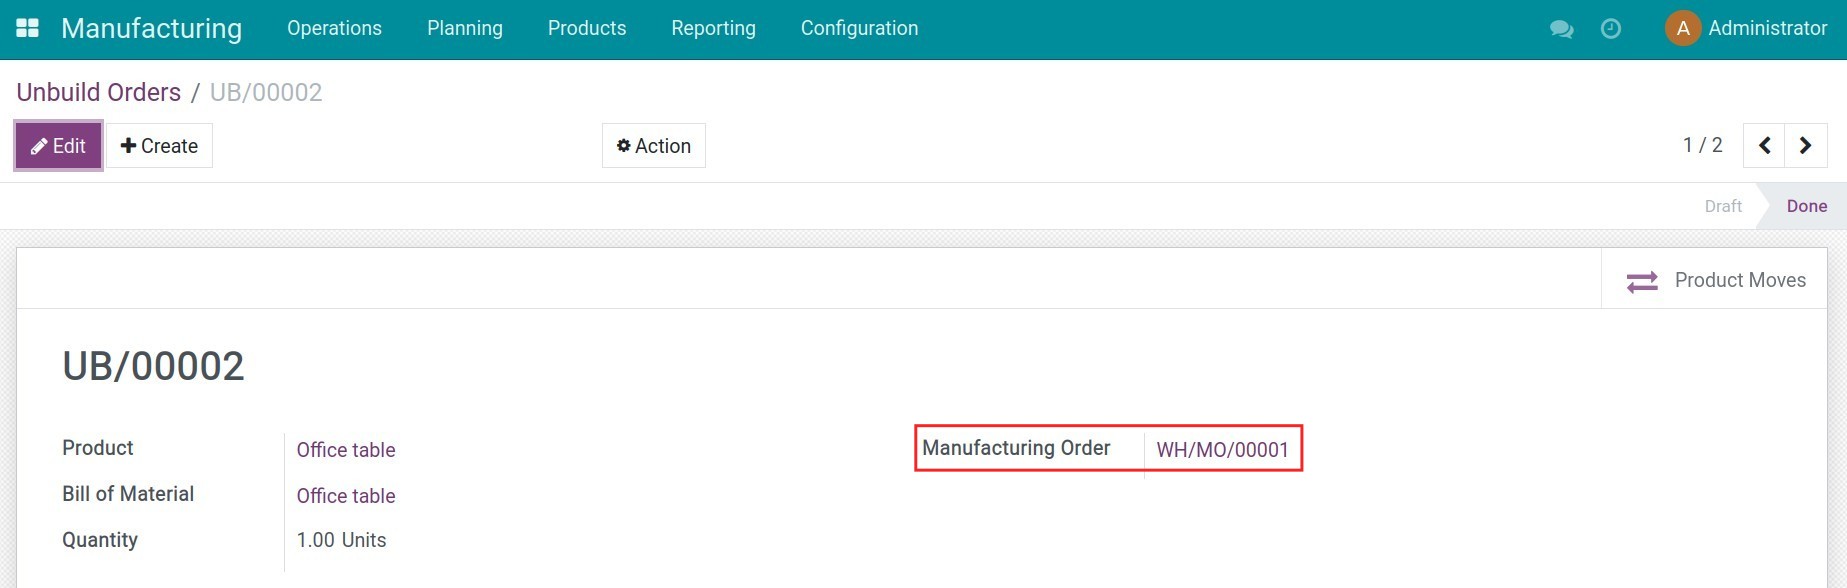 Create an unbuild order from manufacturing order